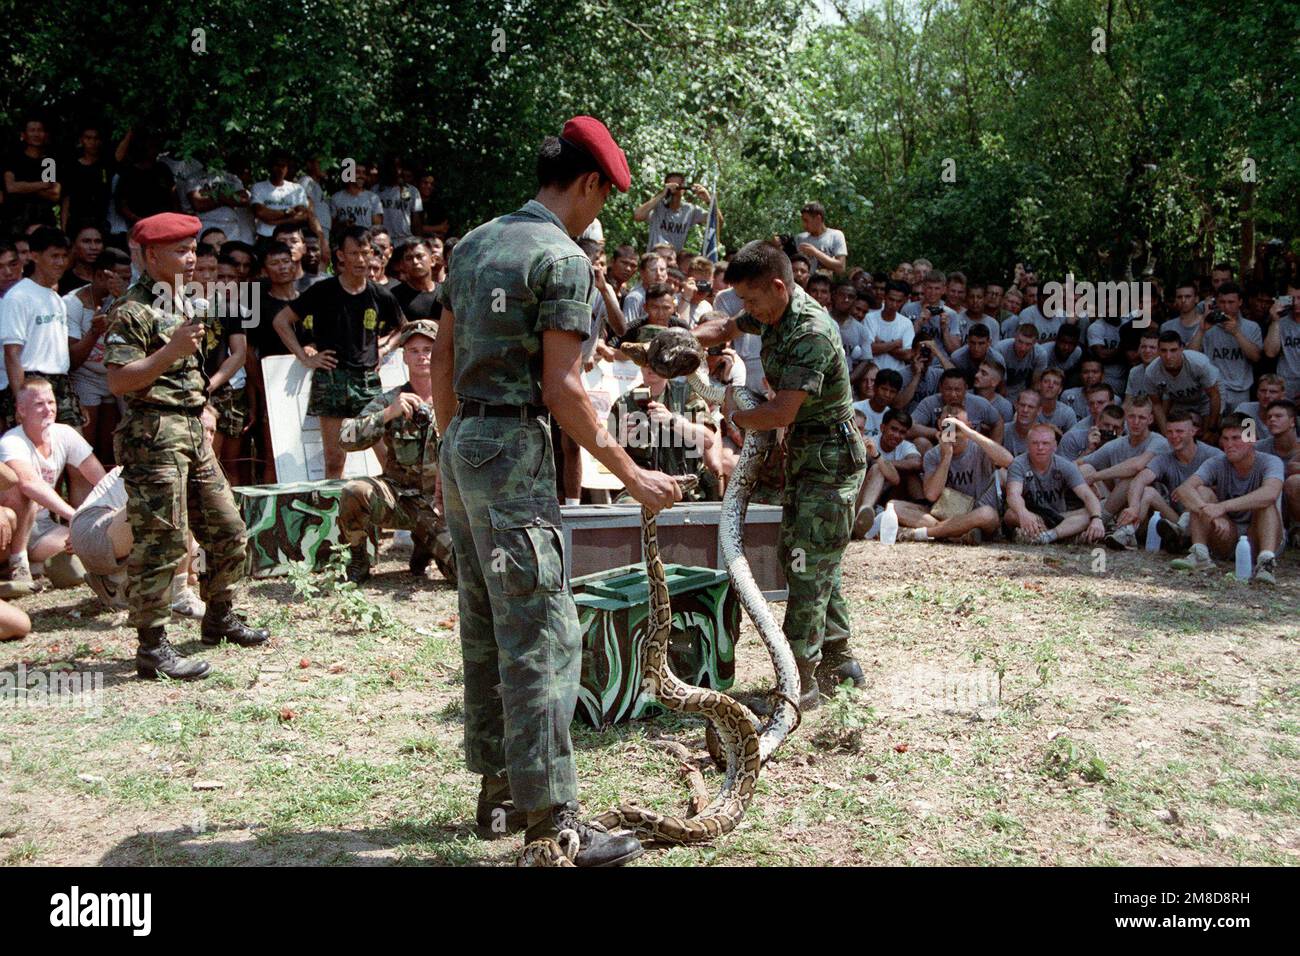 Members of 4th Bn., 22nd Inf., 25th Inf. Div. (Light), watch as two Royal Thai Army instructors display two types of dangerous snakes found in Thailand. The 25th Infantry Division soldiers are in Thailand for the combined Thai/U.S. exercise Cobra Gold '90. Subject Operation/Series: COBRA GOLD '90 Base: Chon Buri Country: Thailand (THA) Stock Photo